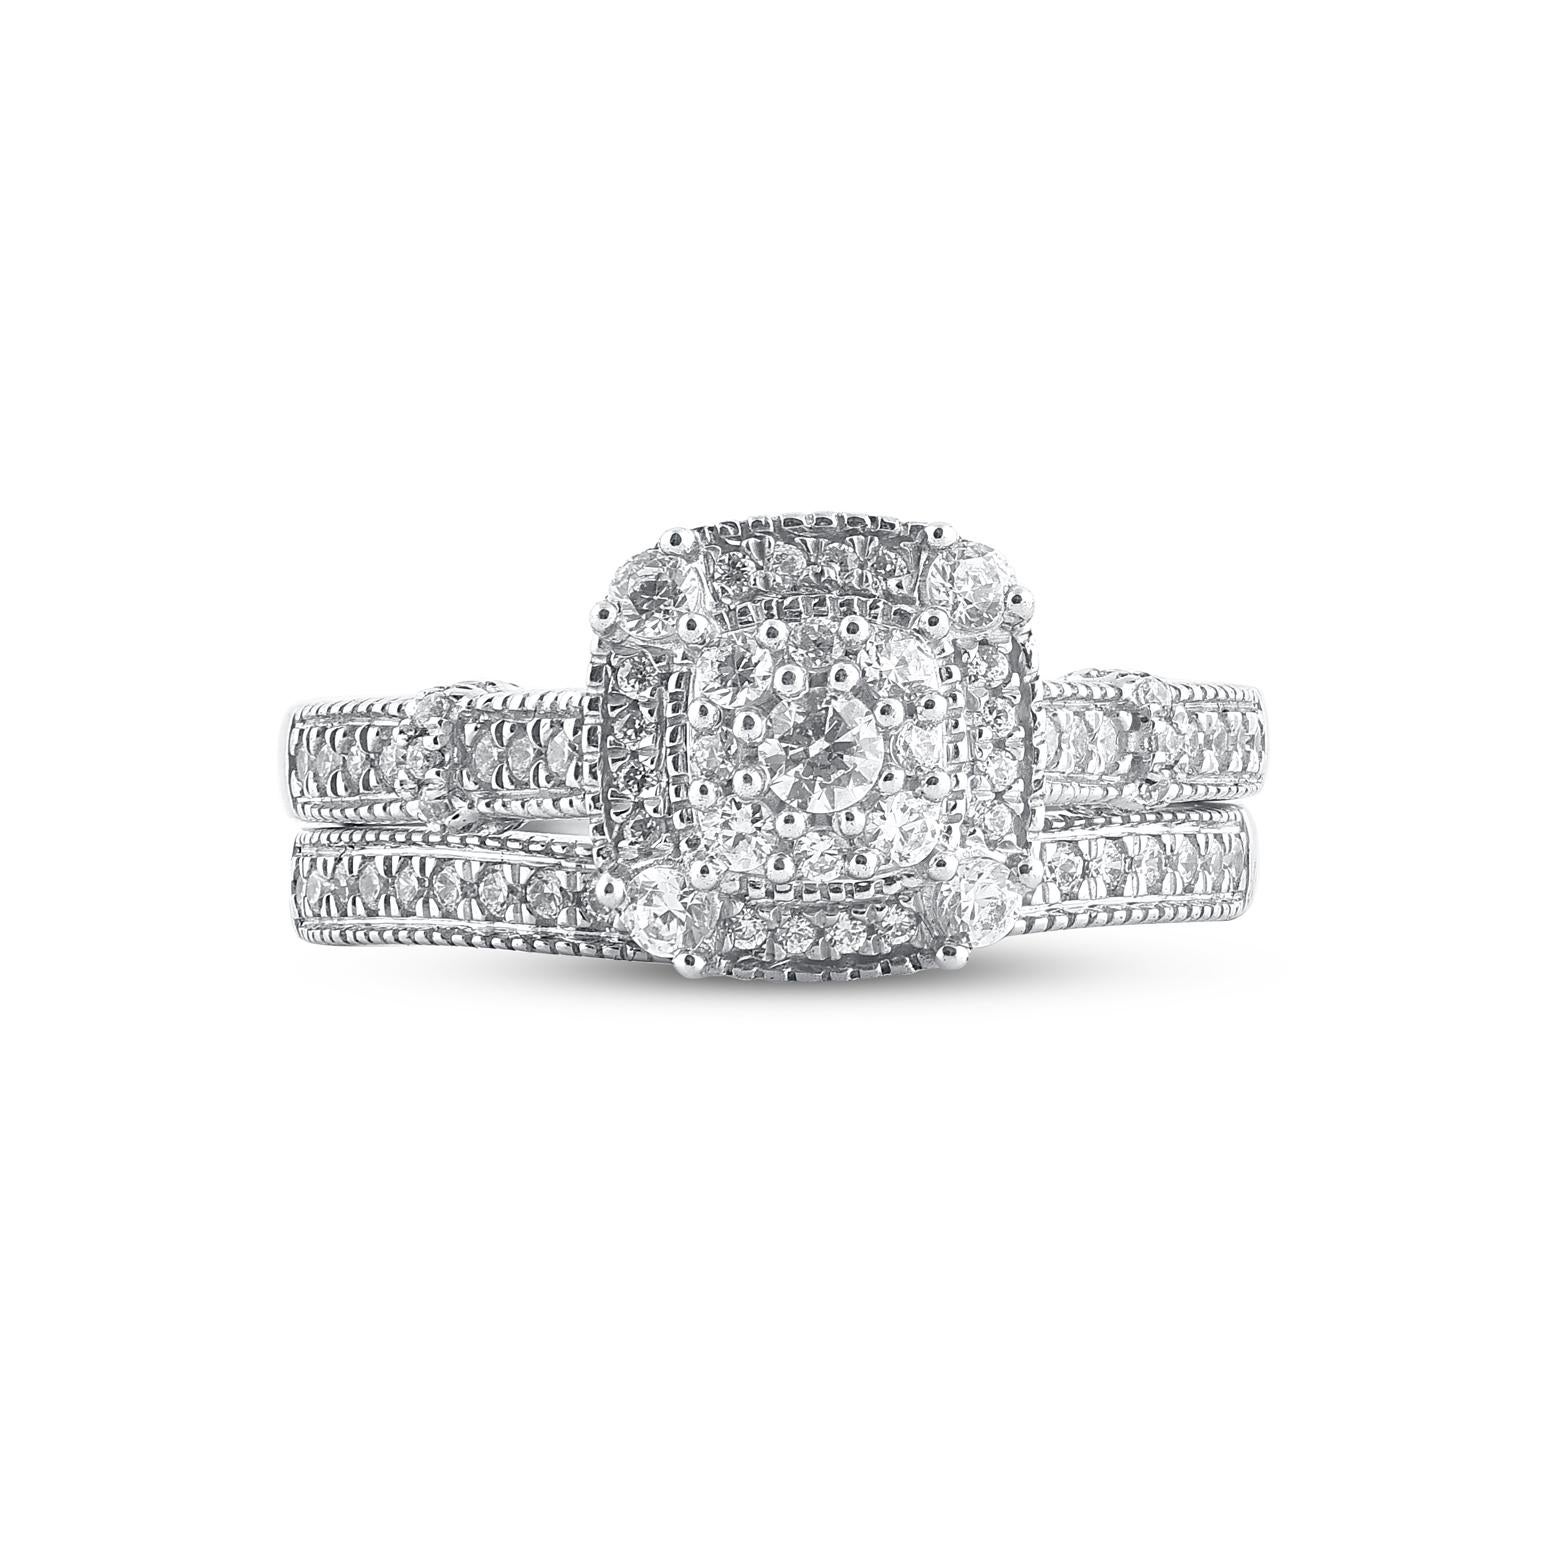 Give her a sophisticated reminder of your love with this diamond ring set. Crafted in 14 Karat white gold. This wedding ring features a sparkling 75 brilliant cut and single cut round diamonds beautifully set in prong and pave setting. The total